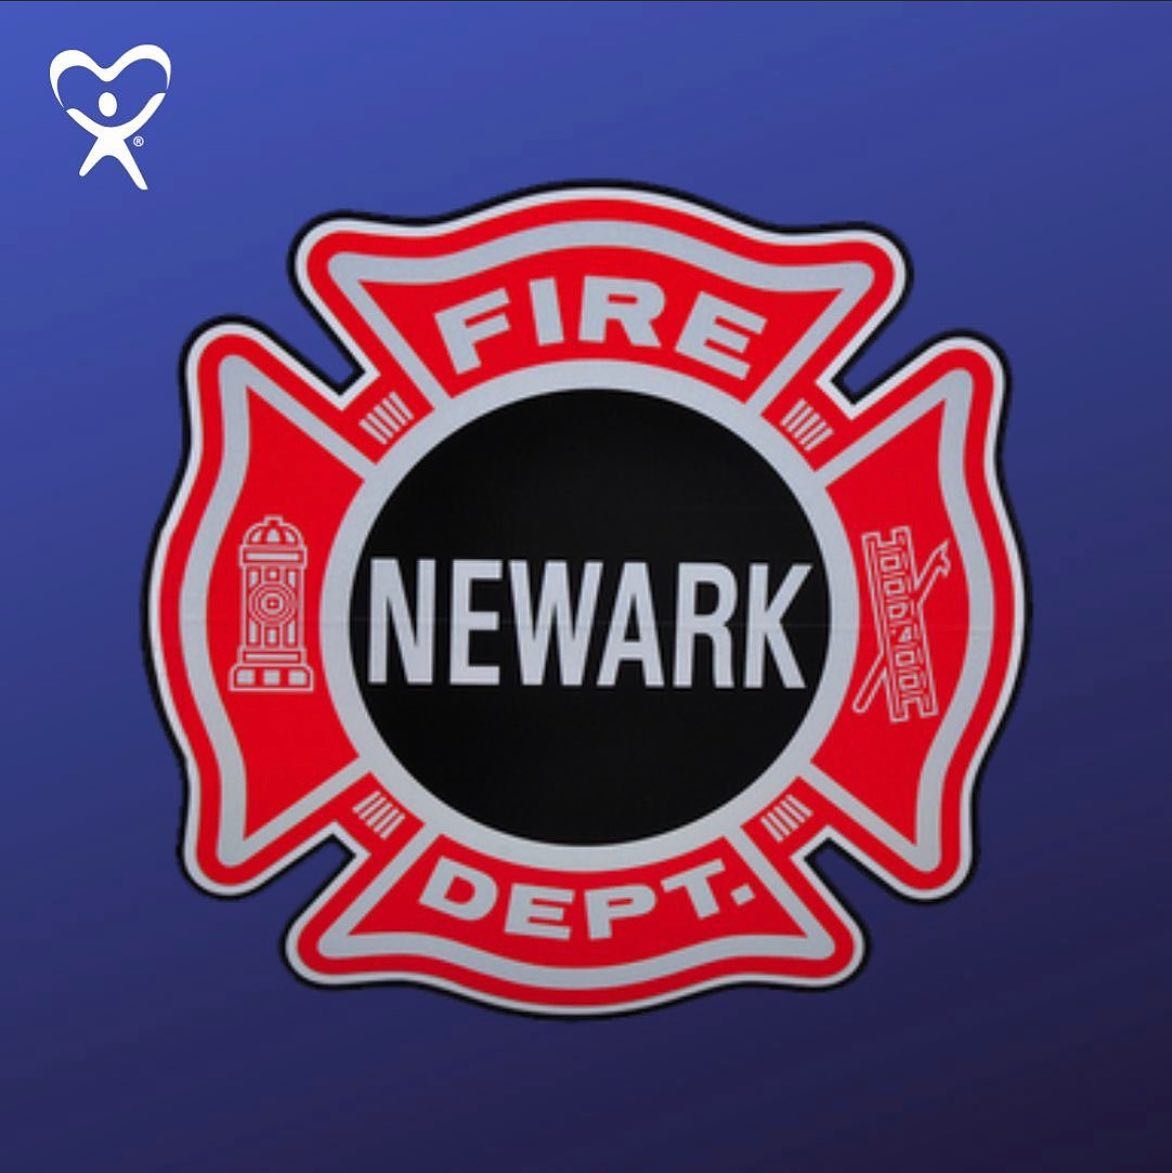 Fireman Friday where community and courage come together &ldquo;Uniting a Brighter Tomorrow.&rdquo;

Shout-out to Newark&rsquo;s bravest at @newarkengine16! As we celebrate their courage, let&rsquo;s also stay prepared. Check our story to see the Fam